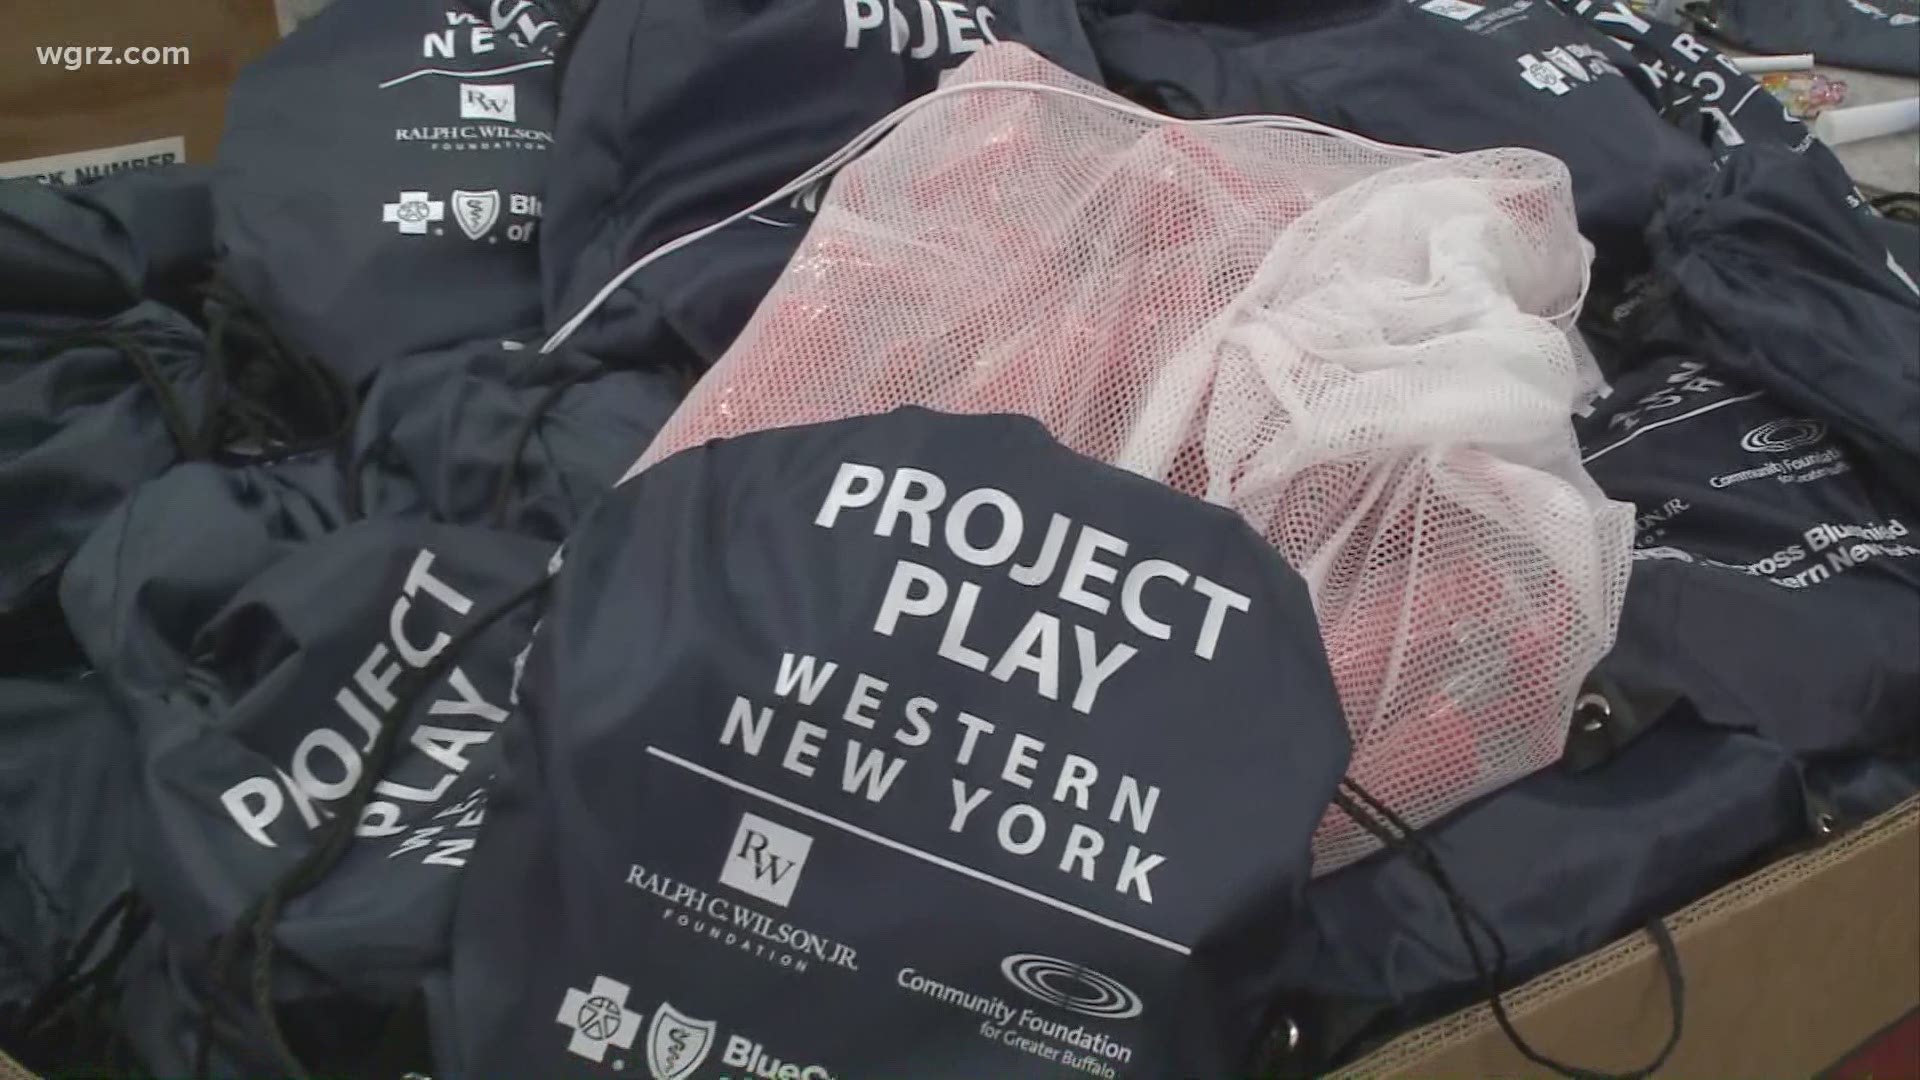 Project Play WNY partnered with the Ralph C. Wilson Jr. Foundation and BlueCross BlueShield WNY to put these bags into 12,000 homes.